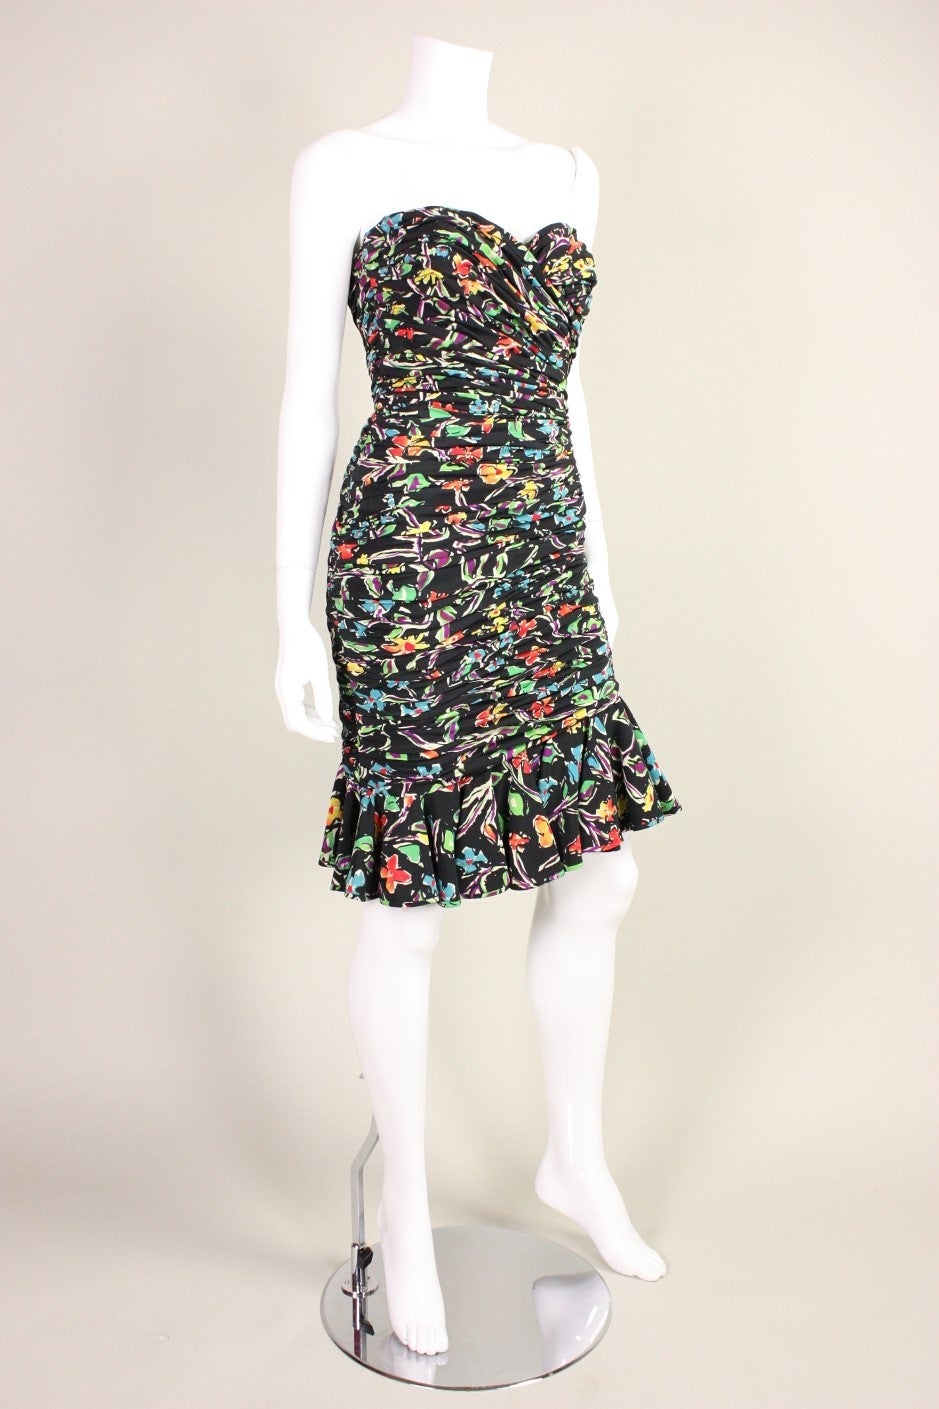 Ungaro cocktail dress dates to the 1980's and is made of printed black silk that is fully ruched.  Asymmetrical skirt has flounce hem.  Side zipper.  Fully lined.

Labeled a vintage size 10, but we estimate it to be a modern size